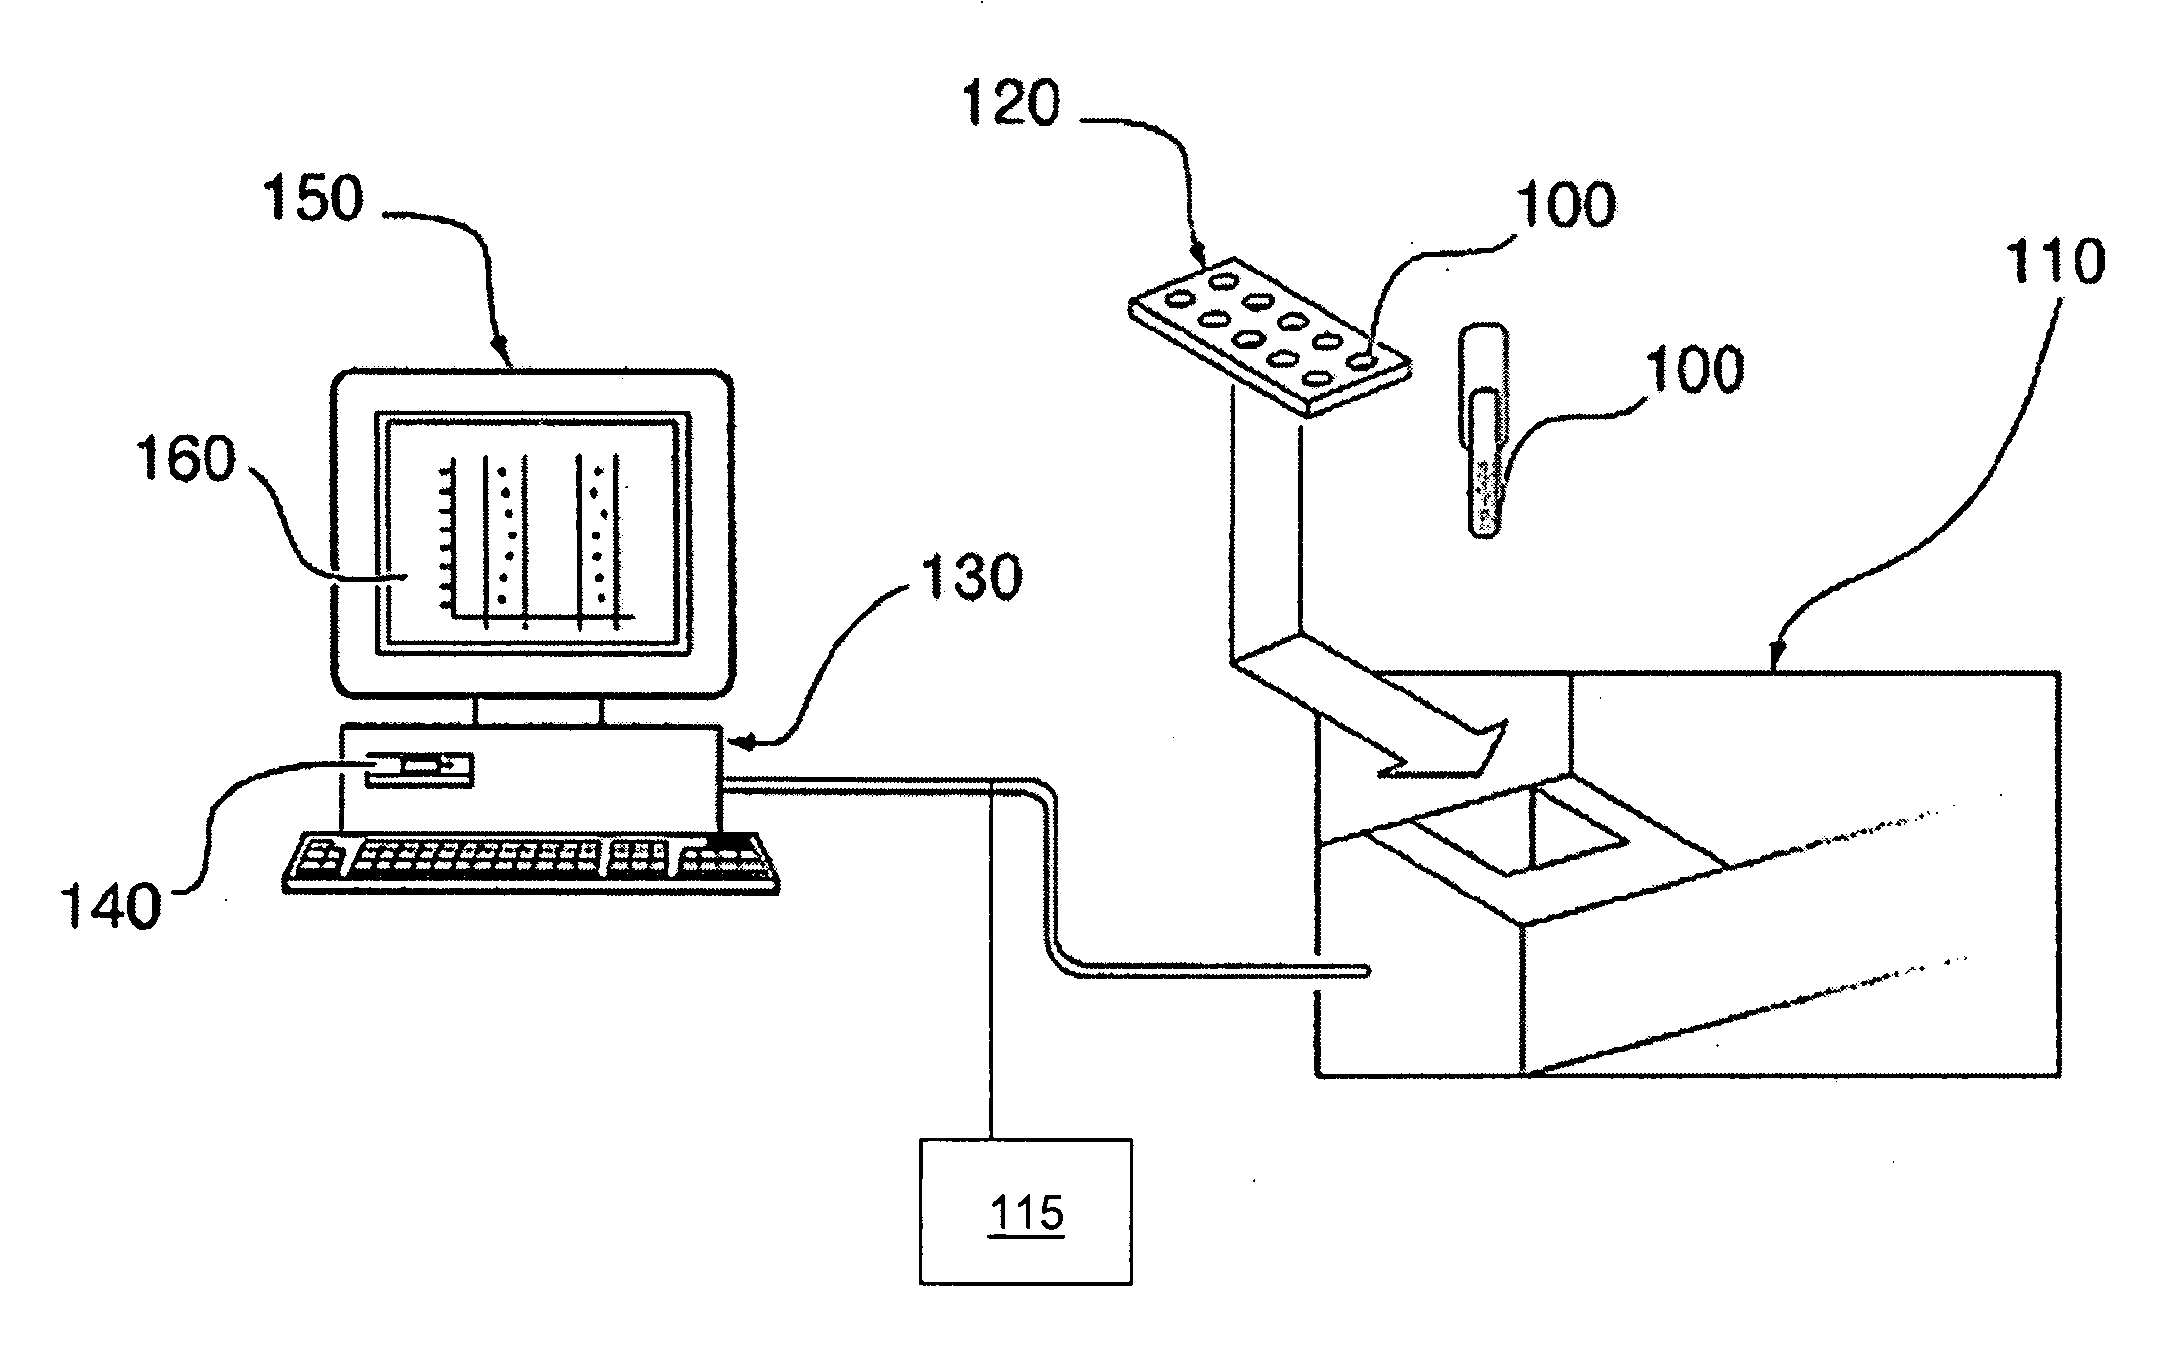 System and Method for Analyzing Metabolomic Data